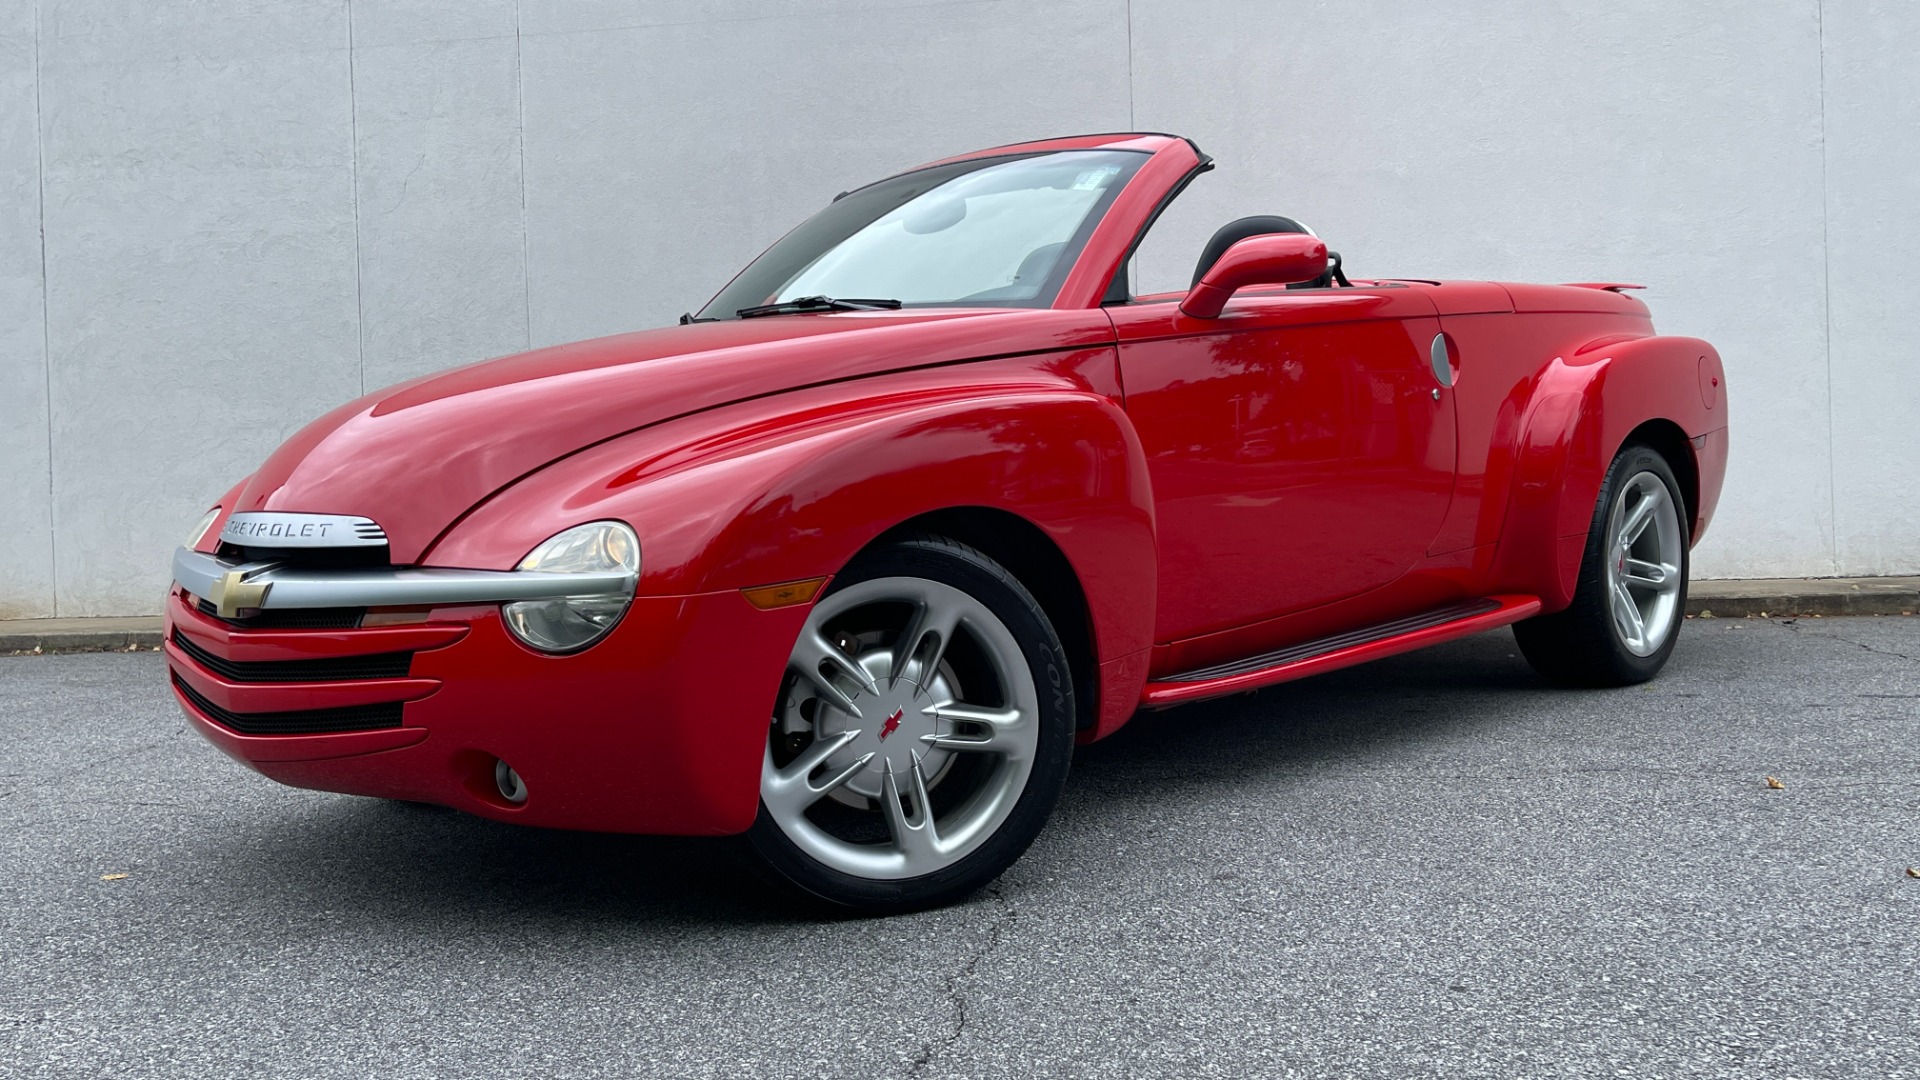 Used 2004 Chevrolet SSR LS / CONVERTIBLE / 5.3L V8 / LEATHER / HEATED SEATS / BACKUP CAMERA for sale $19,995 at Formula Imports in Charlotte NC 28227 28